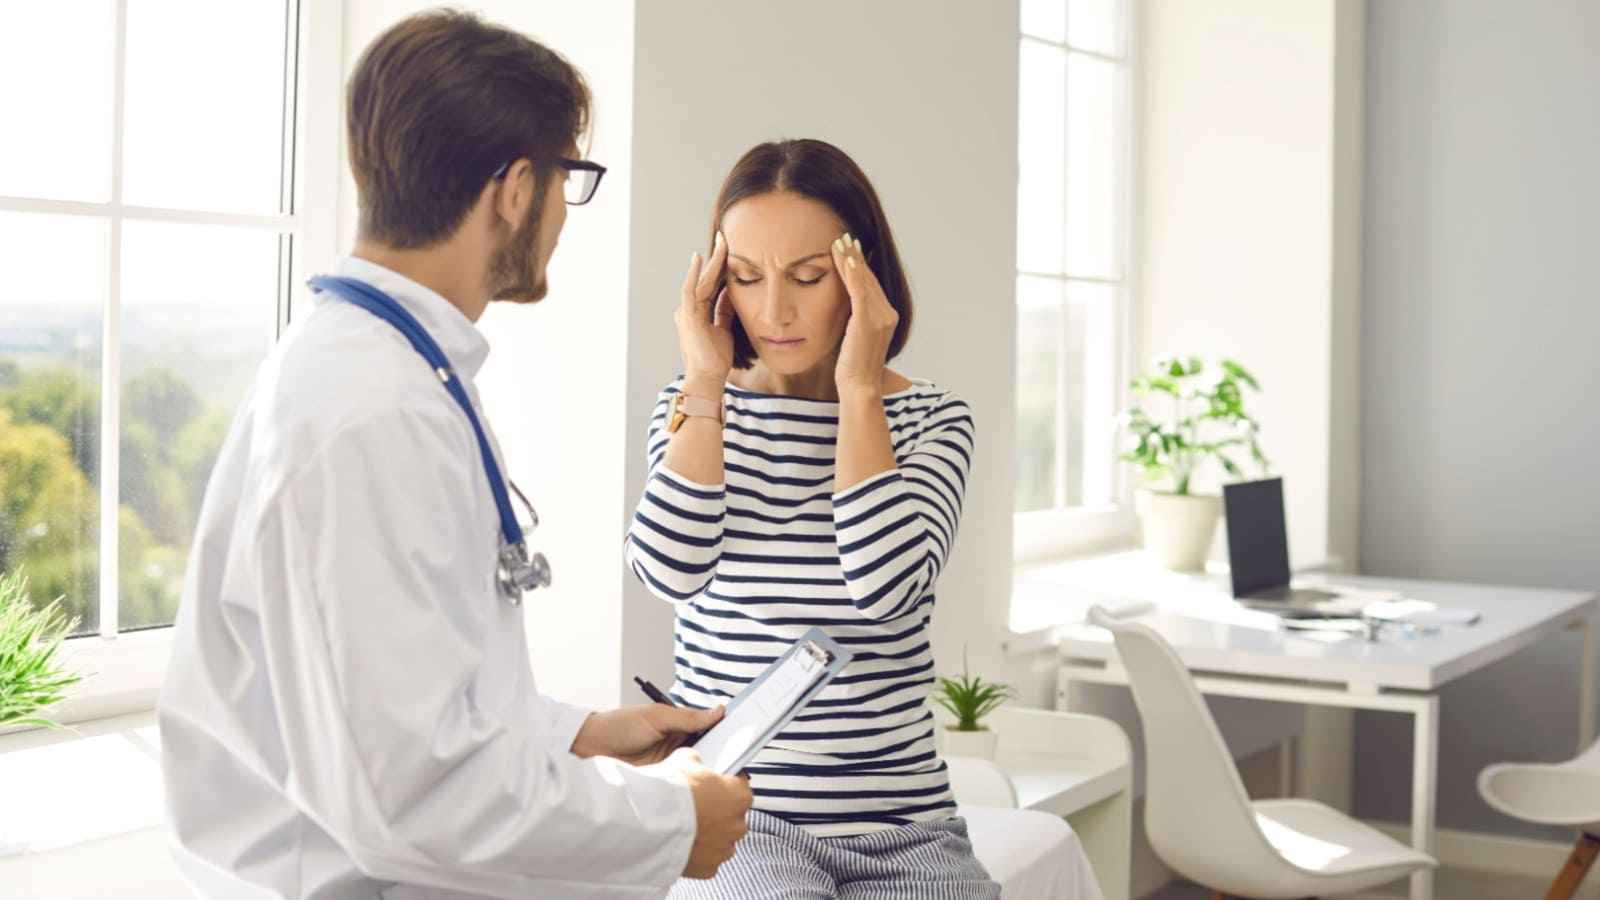 Male doctor checking woman with migraine